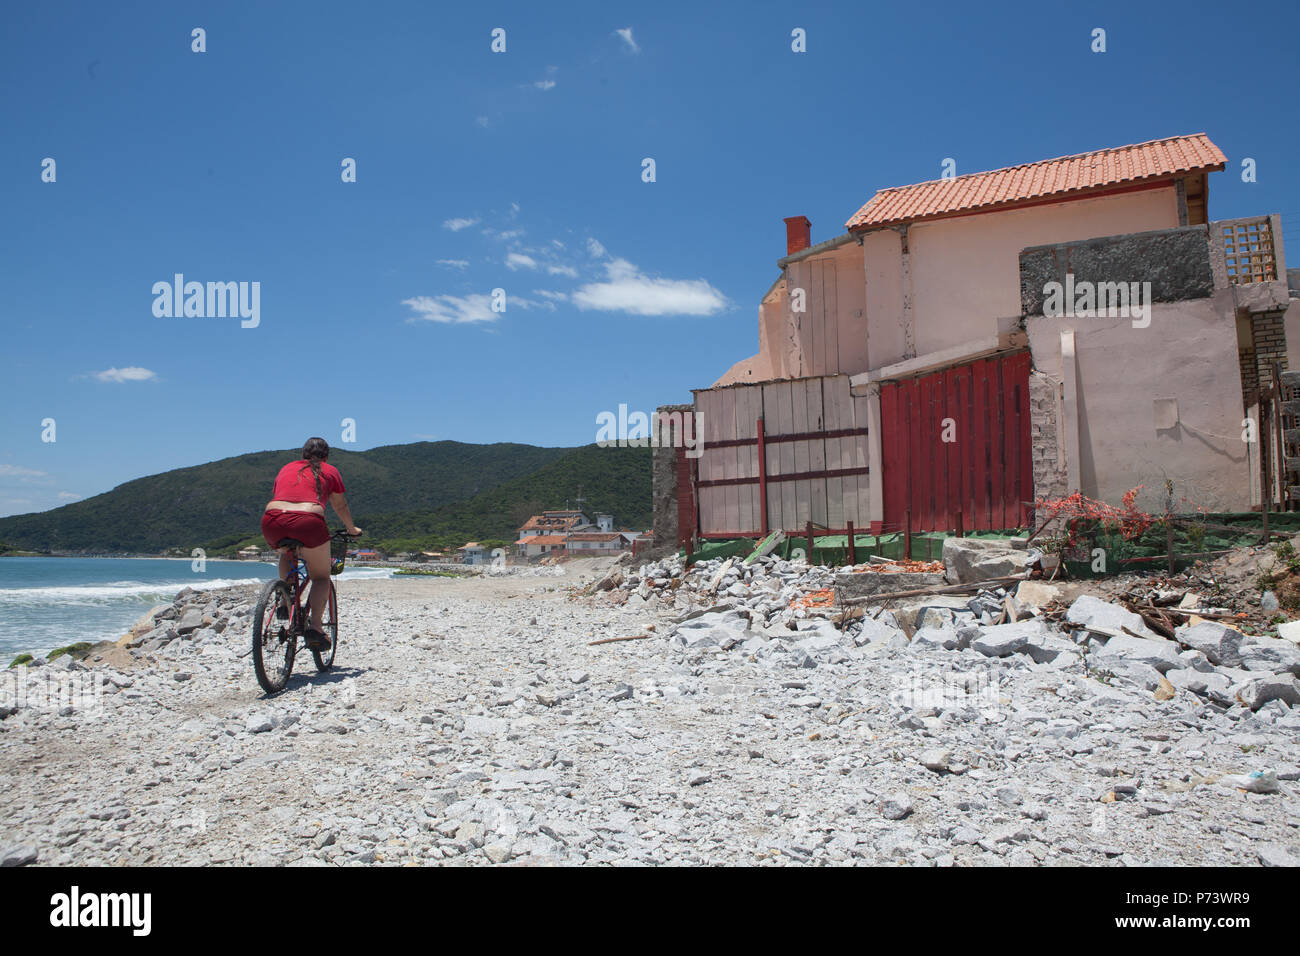 Florianopolis, Santa Catarina, Brazil. Girl riding a bike on a street destroyed by the waves of the sea. Effect of rising sea level. Stock Photo